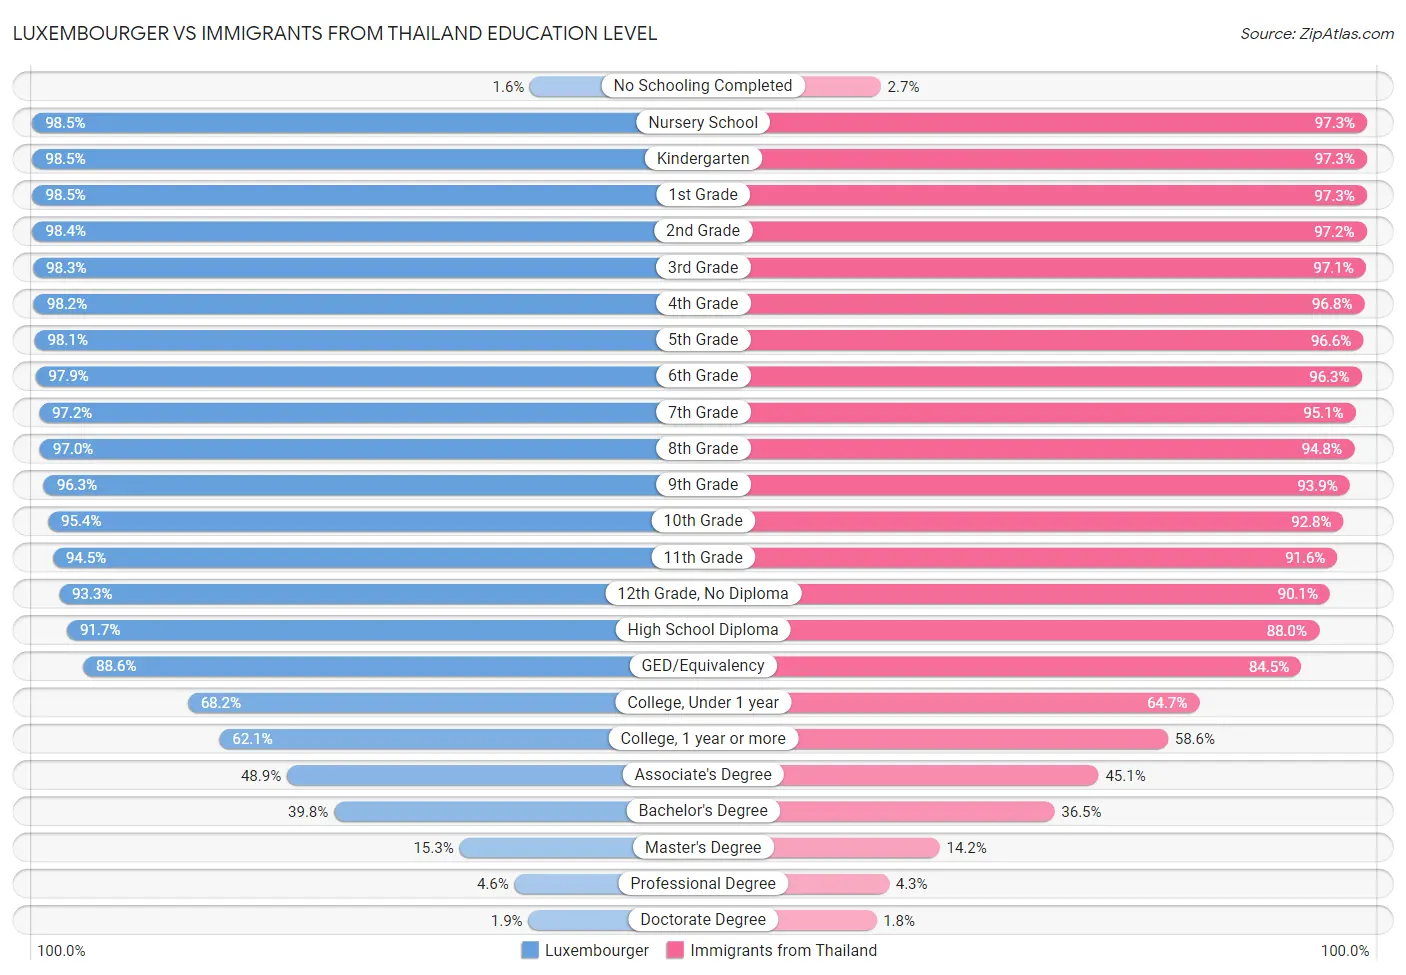 Luxembourger vs Immigrants from Thailand Education Level